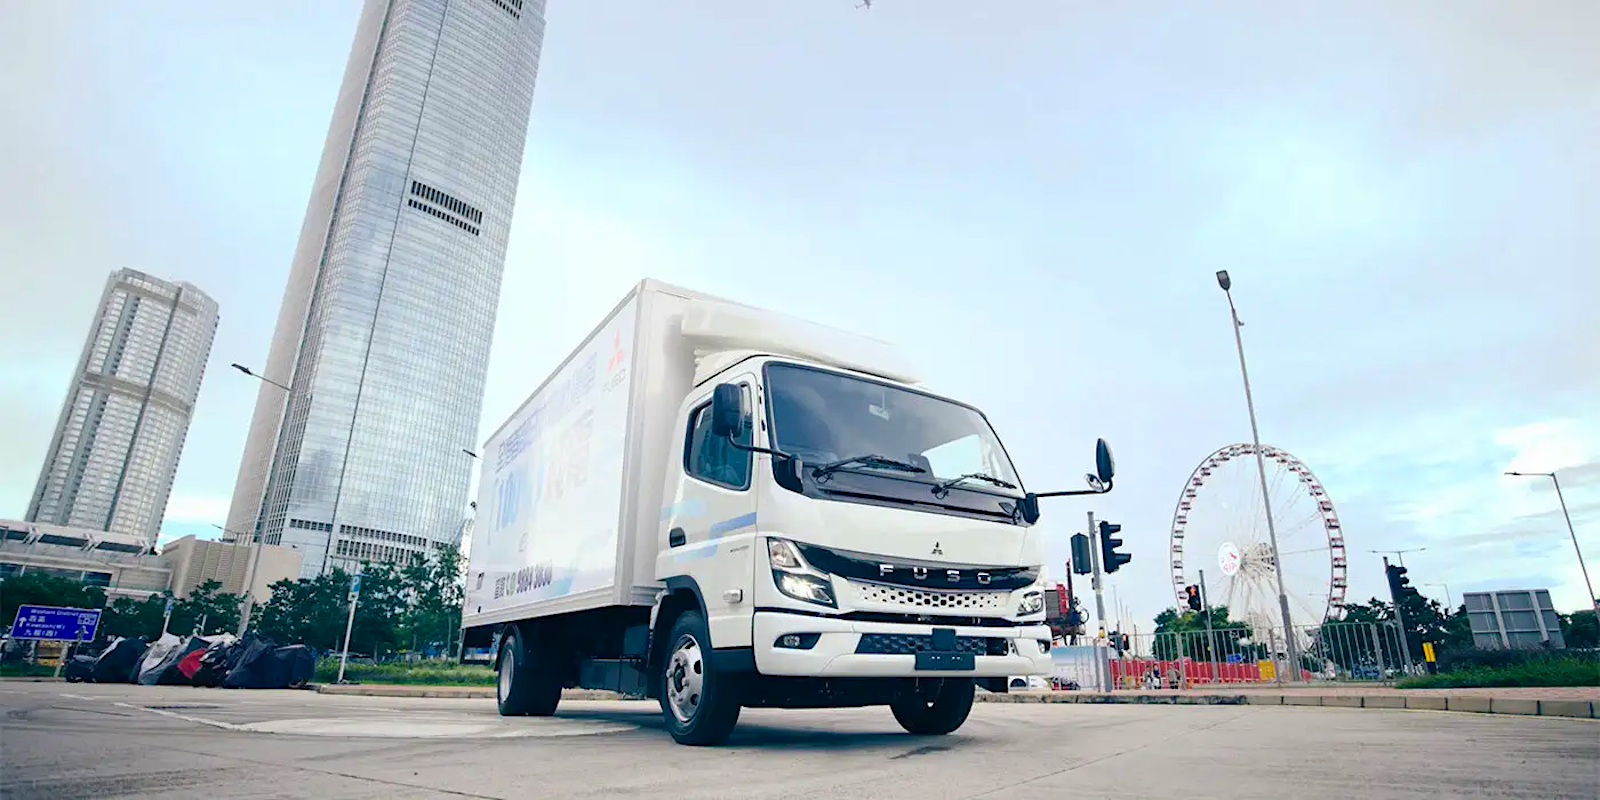 FUSO’s all-electric light-duty eCanter truck introduced in Hong Kong; first Asian market launch outside Japan